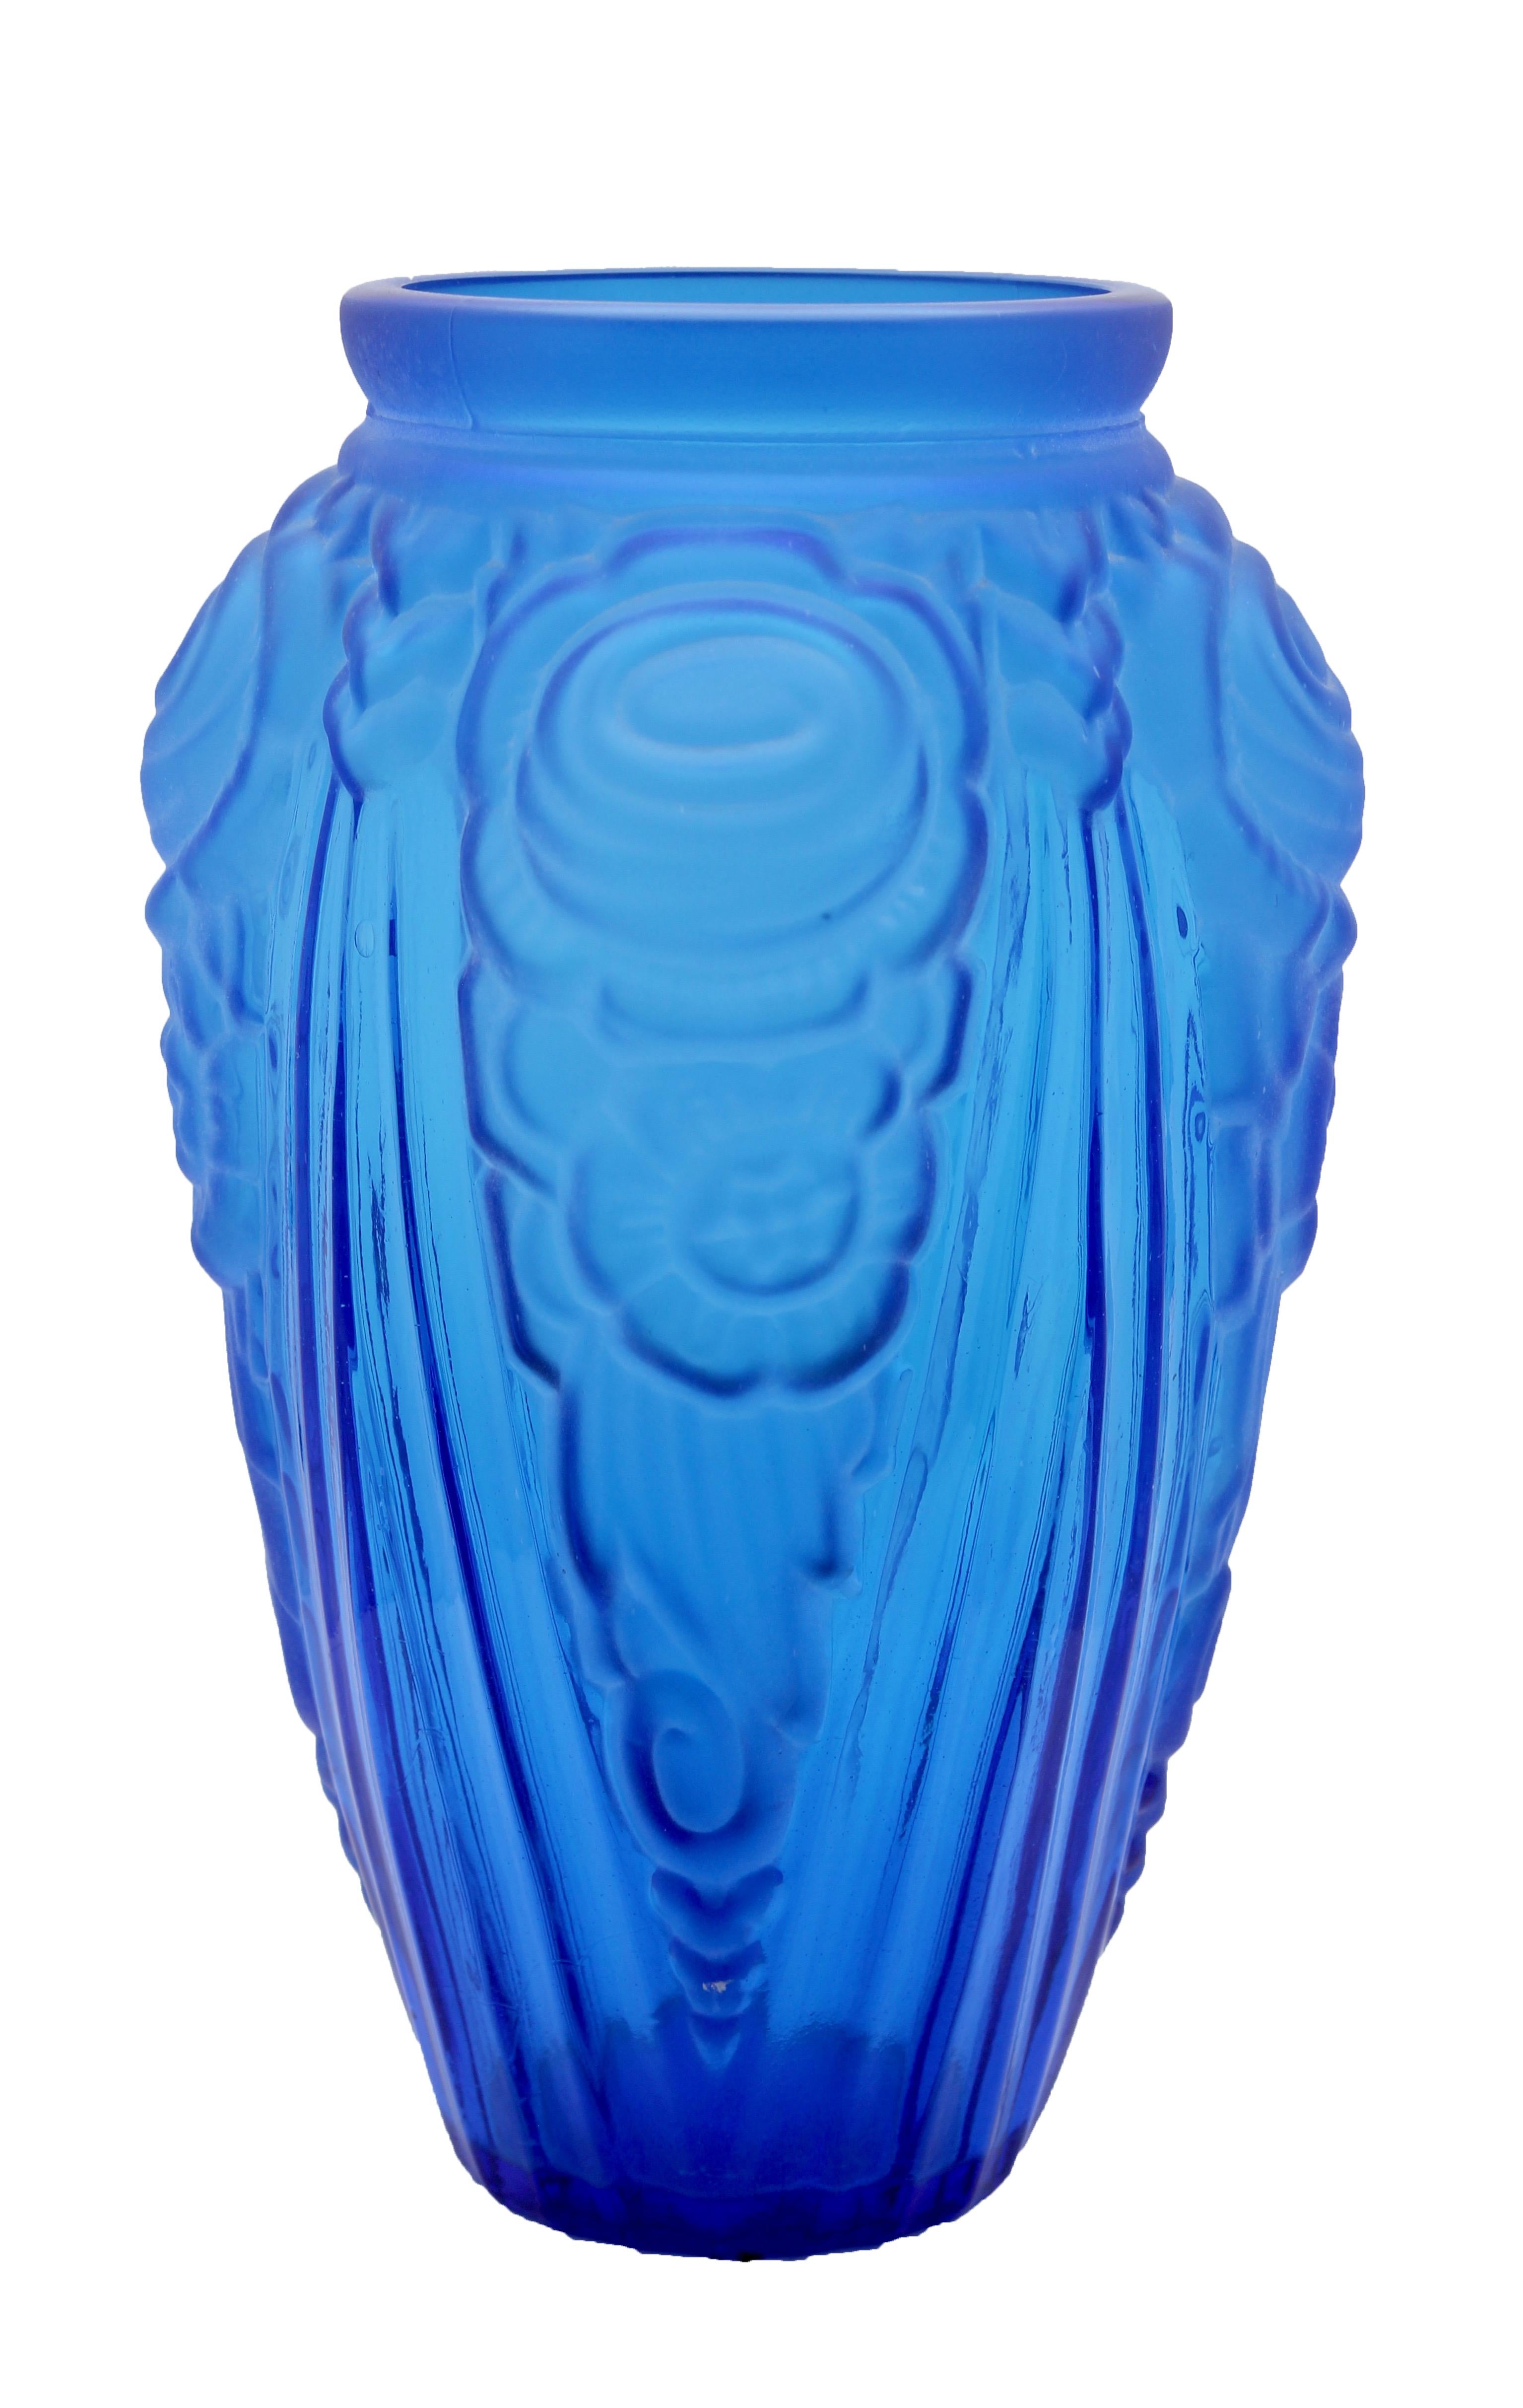 Imposing blue frosted pressed glass vas in Art Deco style. This large vase contrasts the geometry of lines with the rounder forms of flowers and dates to the early 1930s. It was created at the little recognised factory of Neiman Stolle in